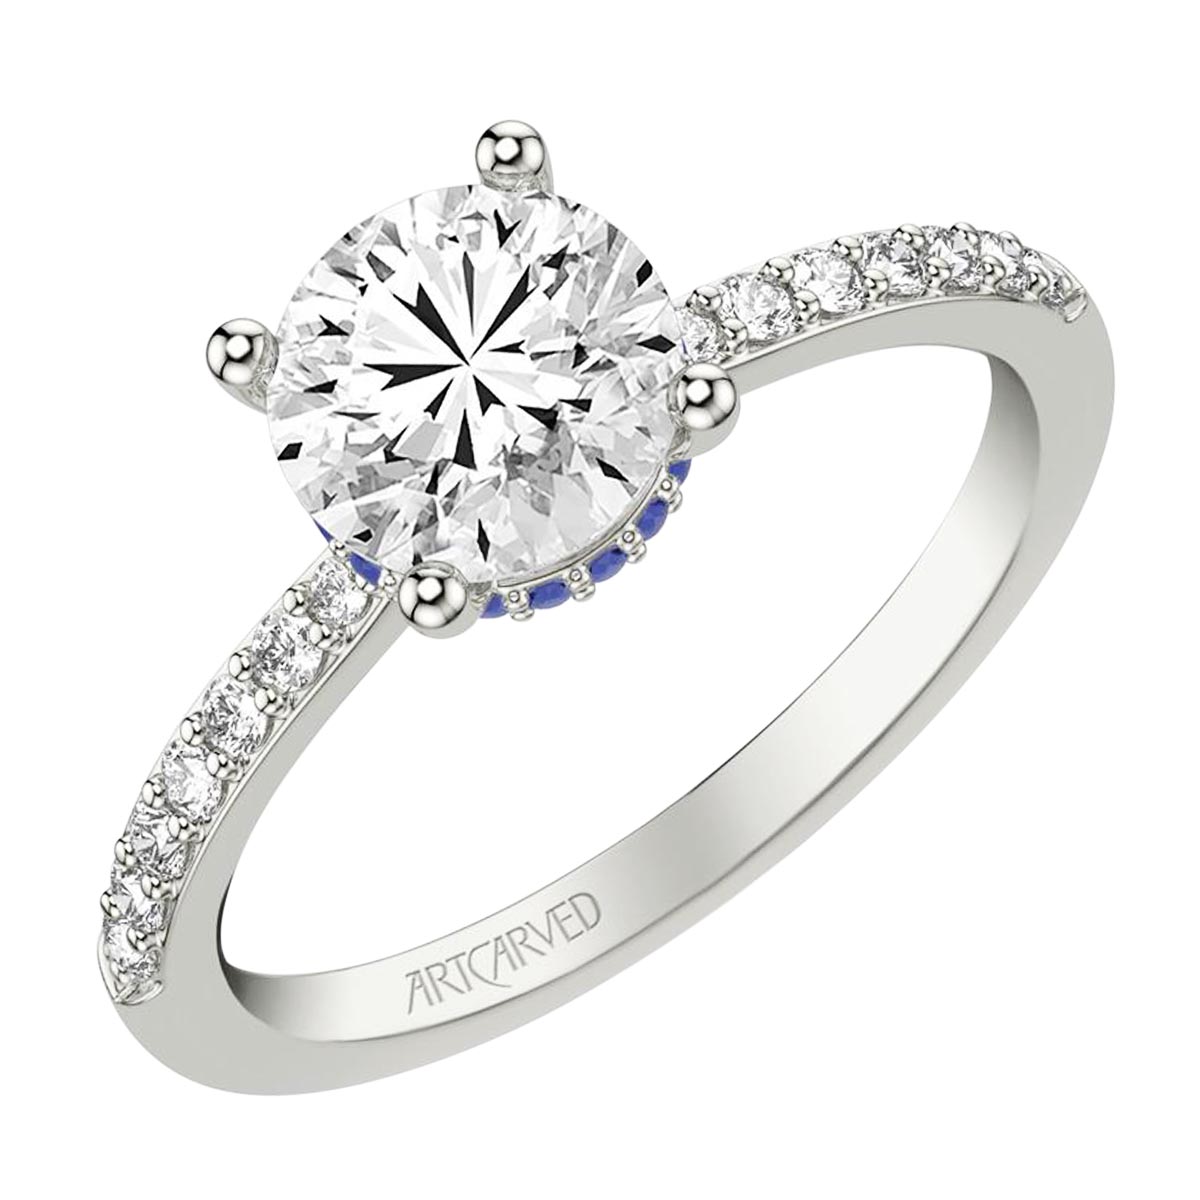 Artcarved Classic Diamond Engagement Ring Setting in 14kt White Gold with Hidden Sapphire Halo and Diamonds (1/7ct tw)